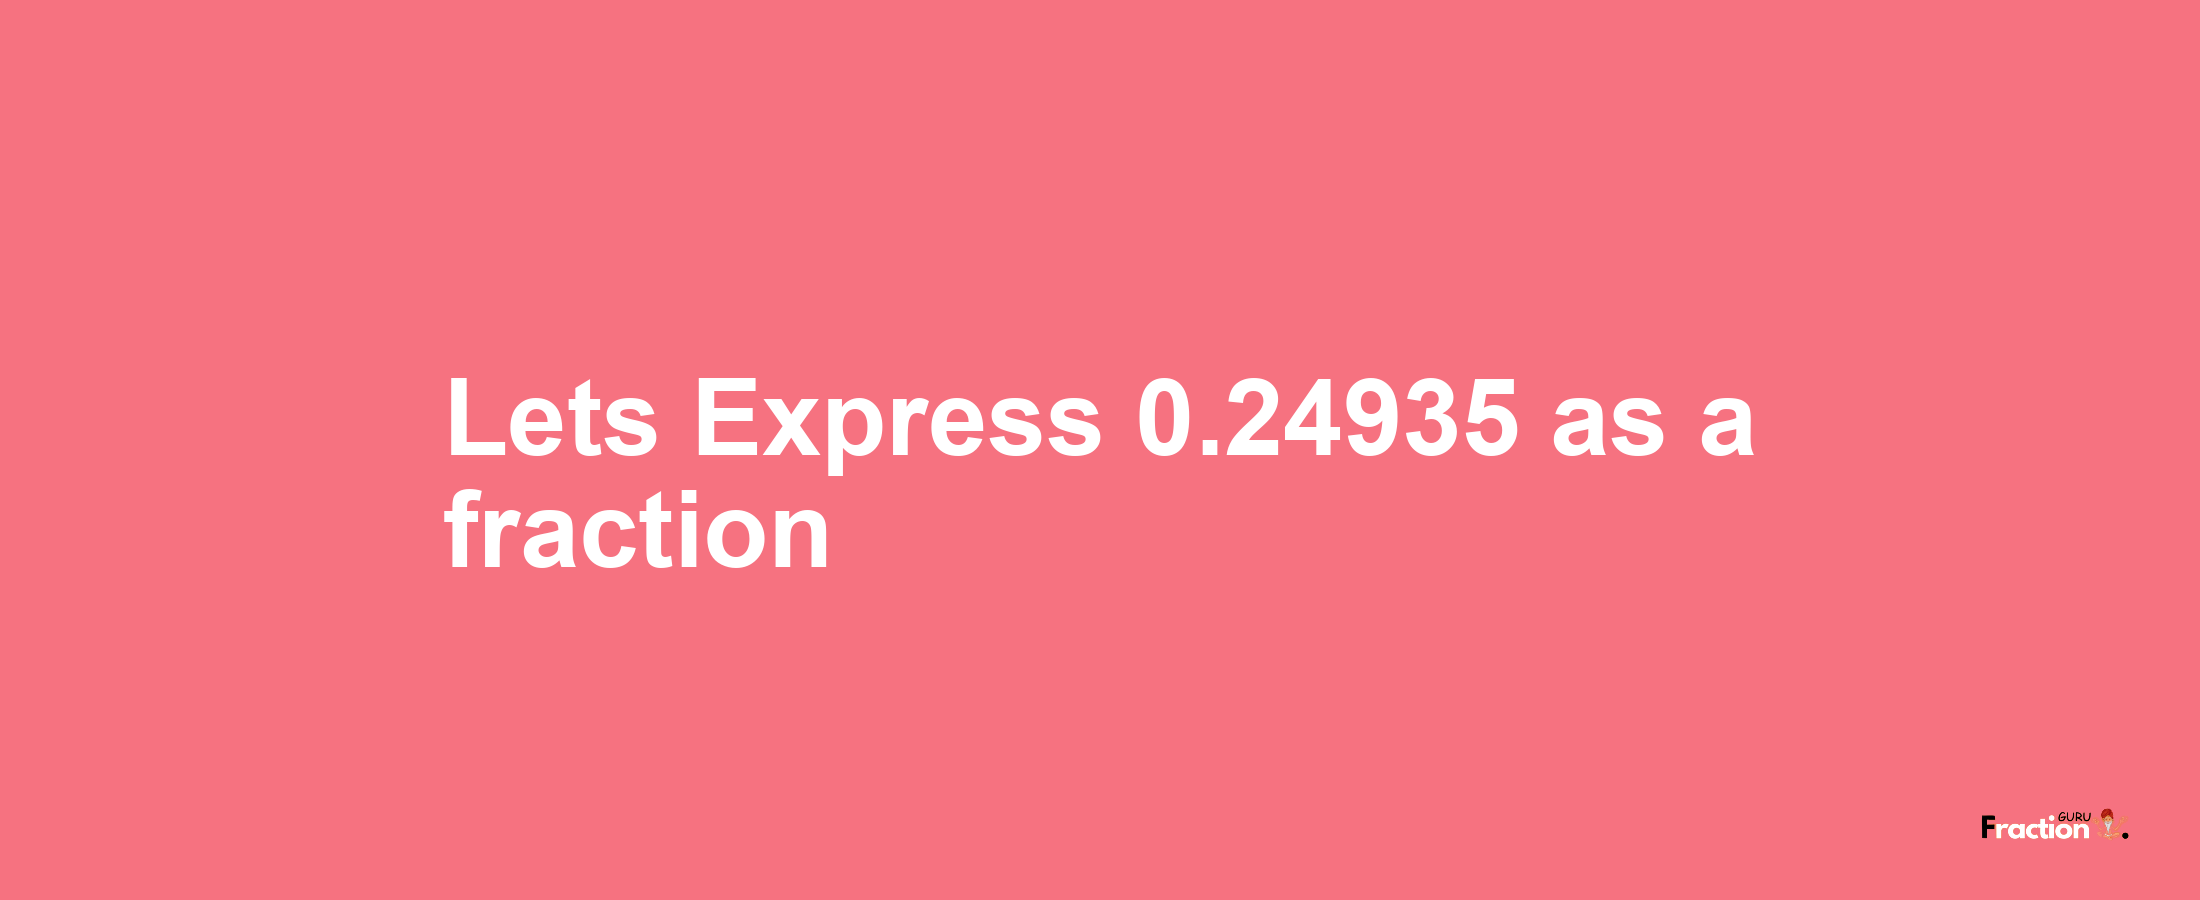 Lets Express 0.24935 as afraction